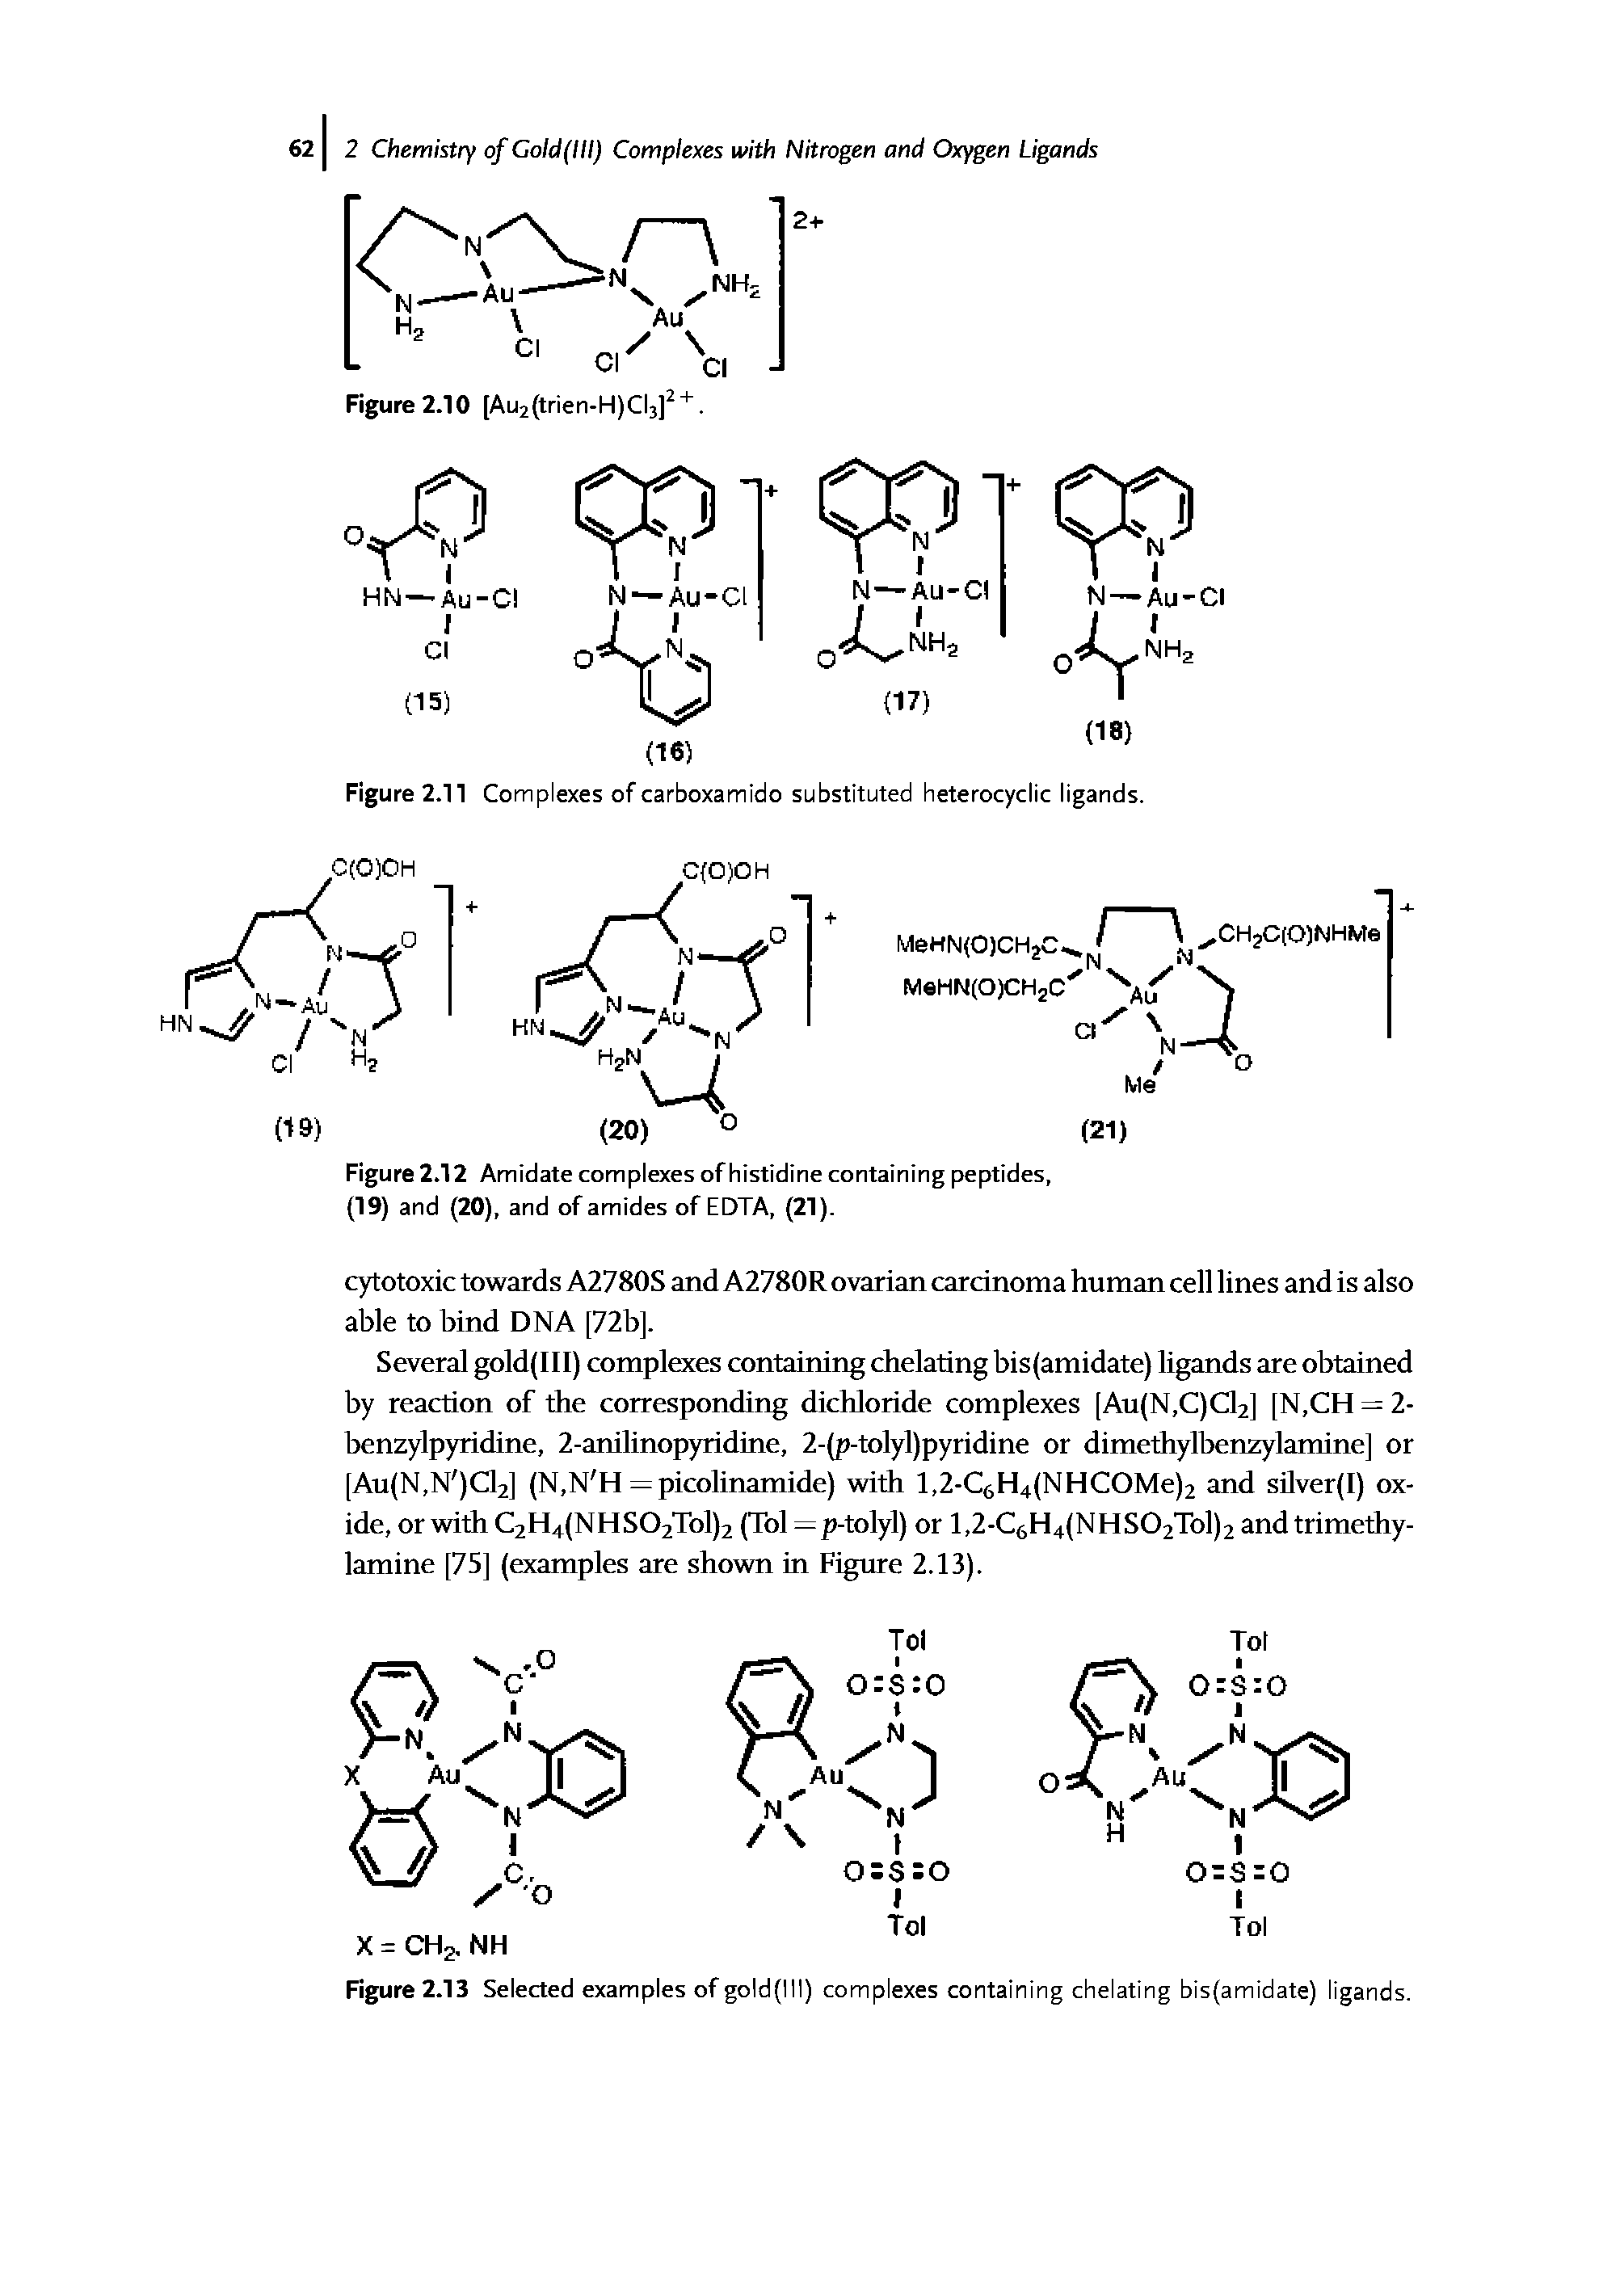 Figure 2.12 Amidate complexes of histidine containing peptides, (19) and (20), and of amides of EDTA, (21).